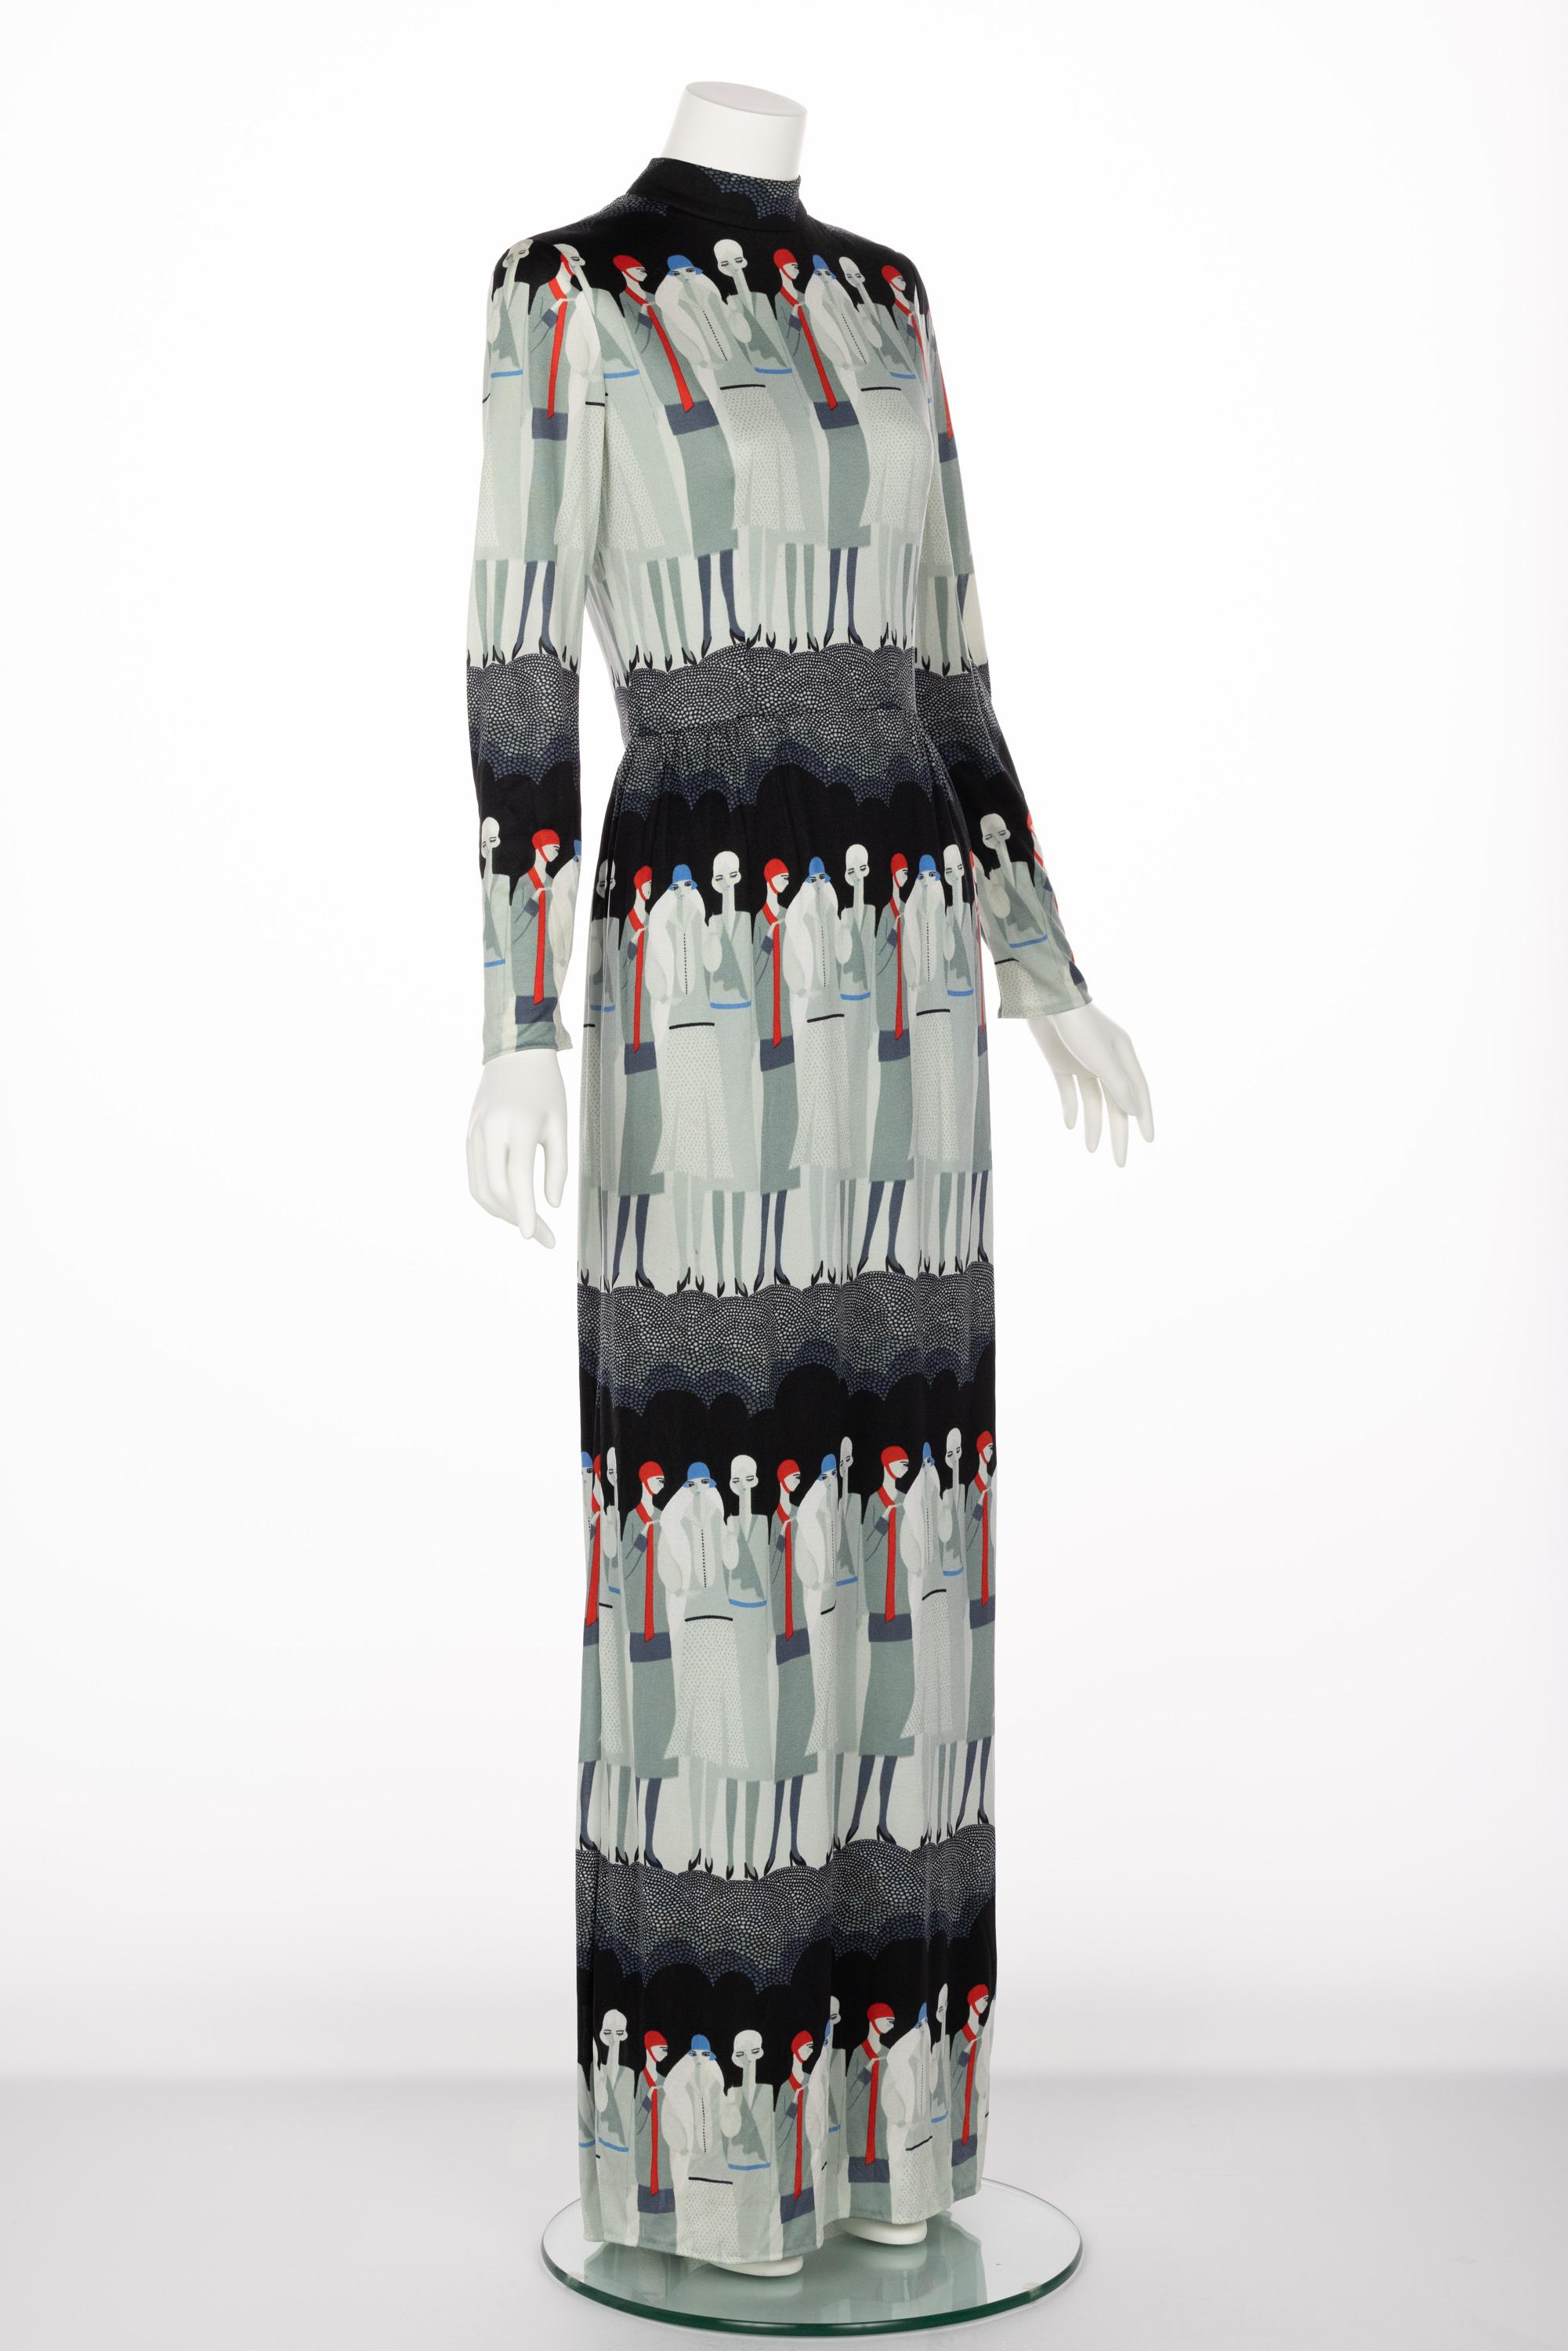 One of the pioneers of American ready-to-wear, Adele Simpson was sought after for her young, fresh, pretty dresses that were easy for women to wear. Featuring a rare flapper lady print made during the Seventies, this eye-catching gown beautifully